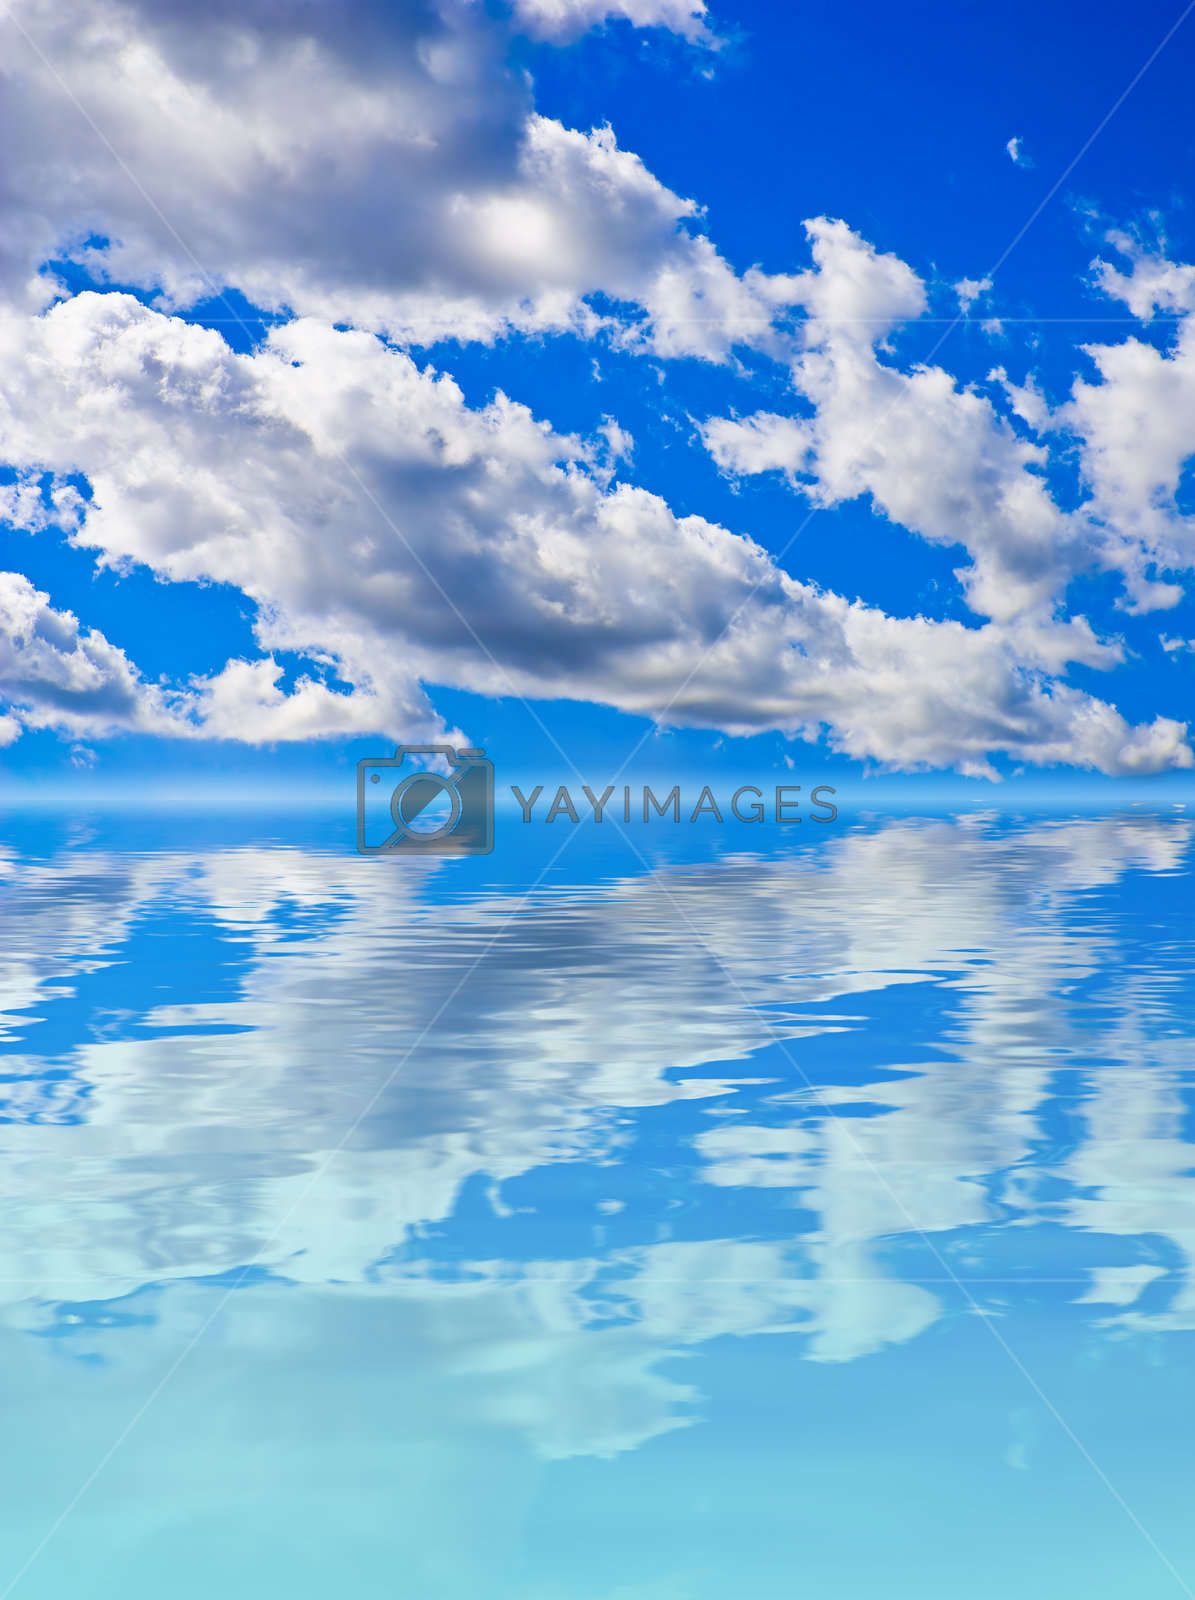 Scenery background in blue sky reflection in water